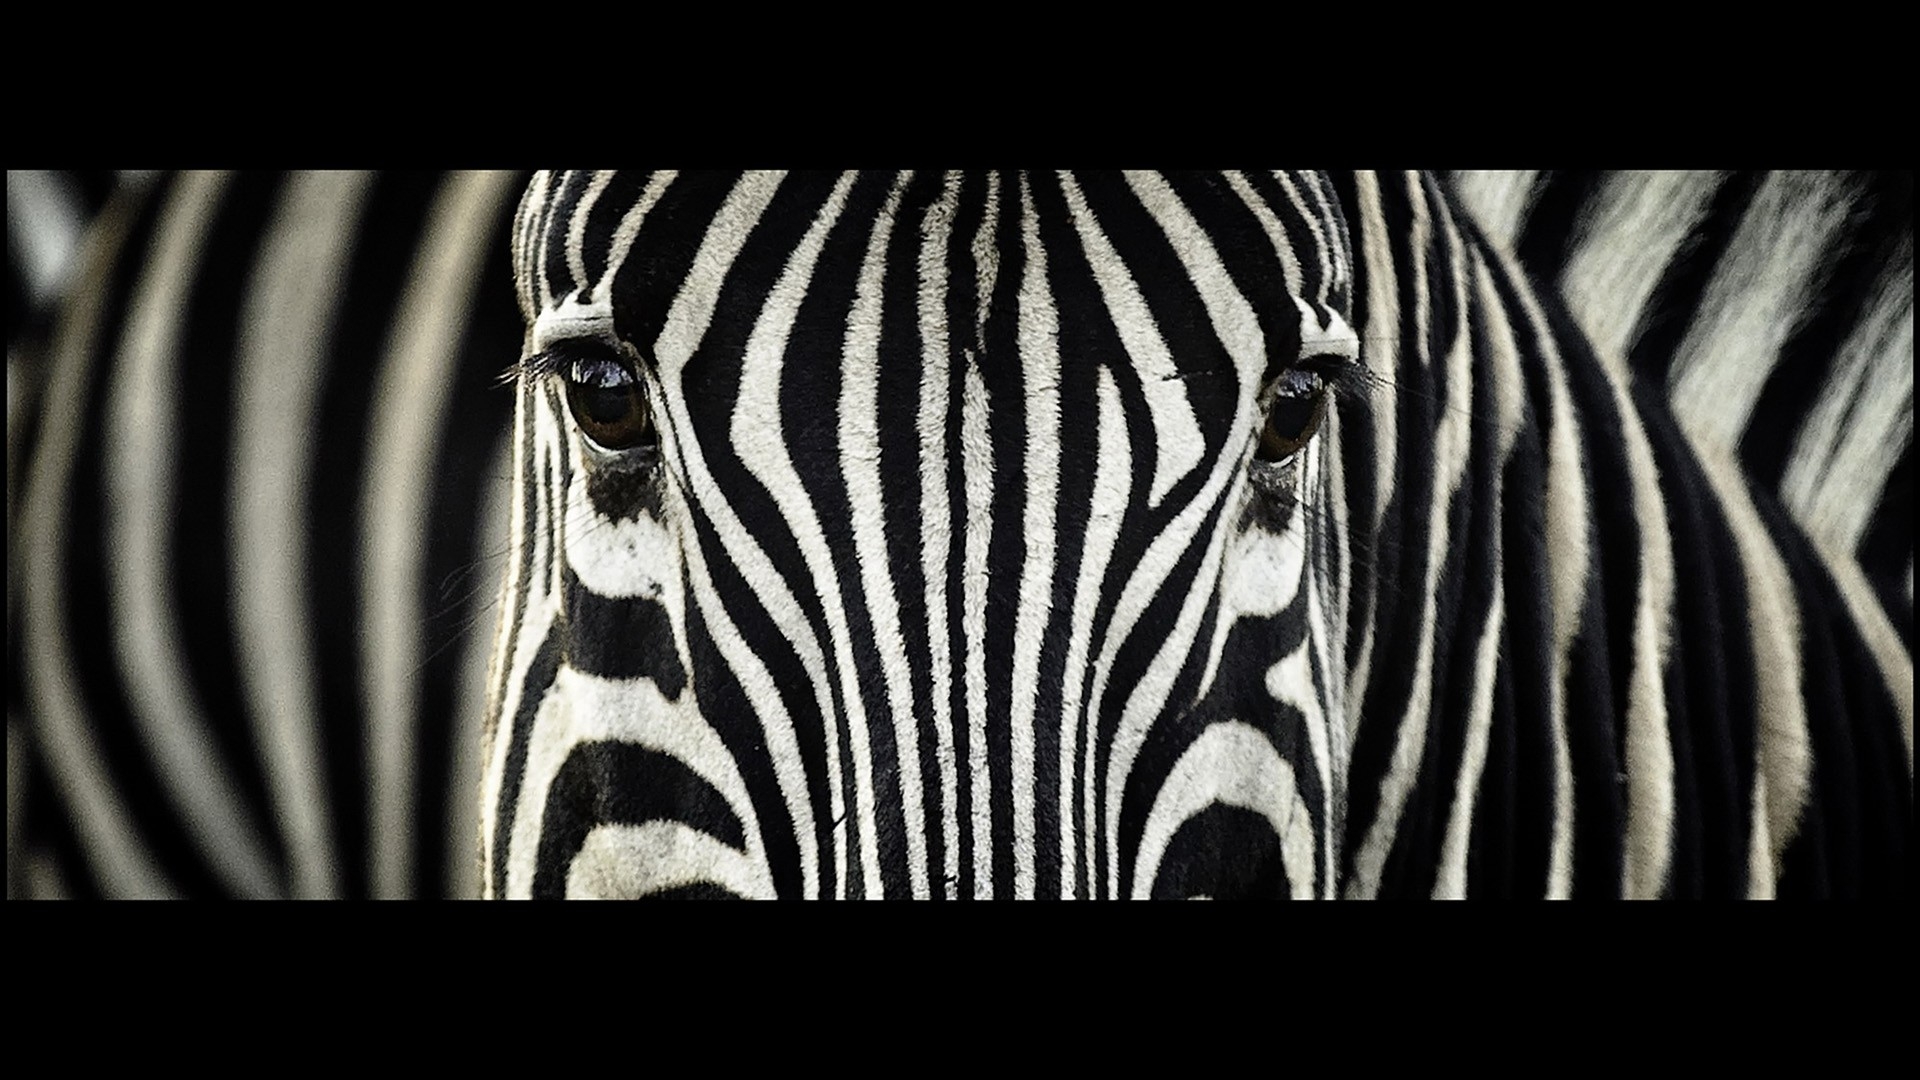 High Resolution Zebra Images Black And White , HD Wallpaper & Backgrounds